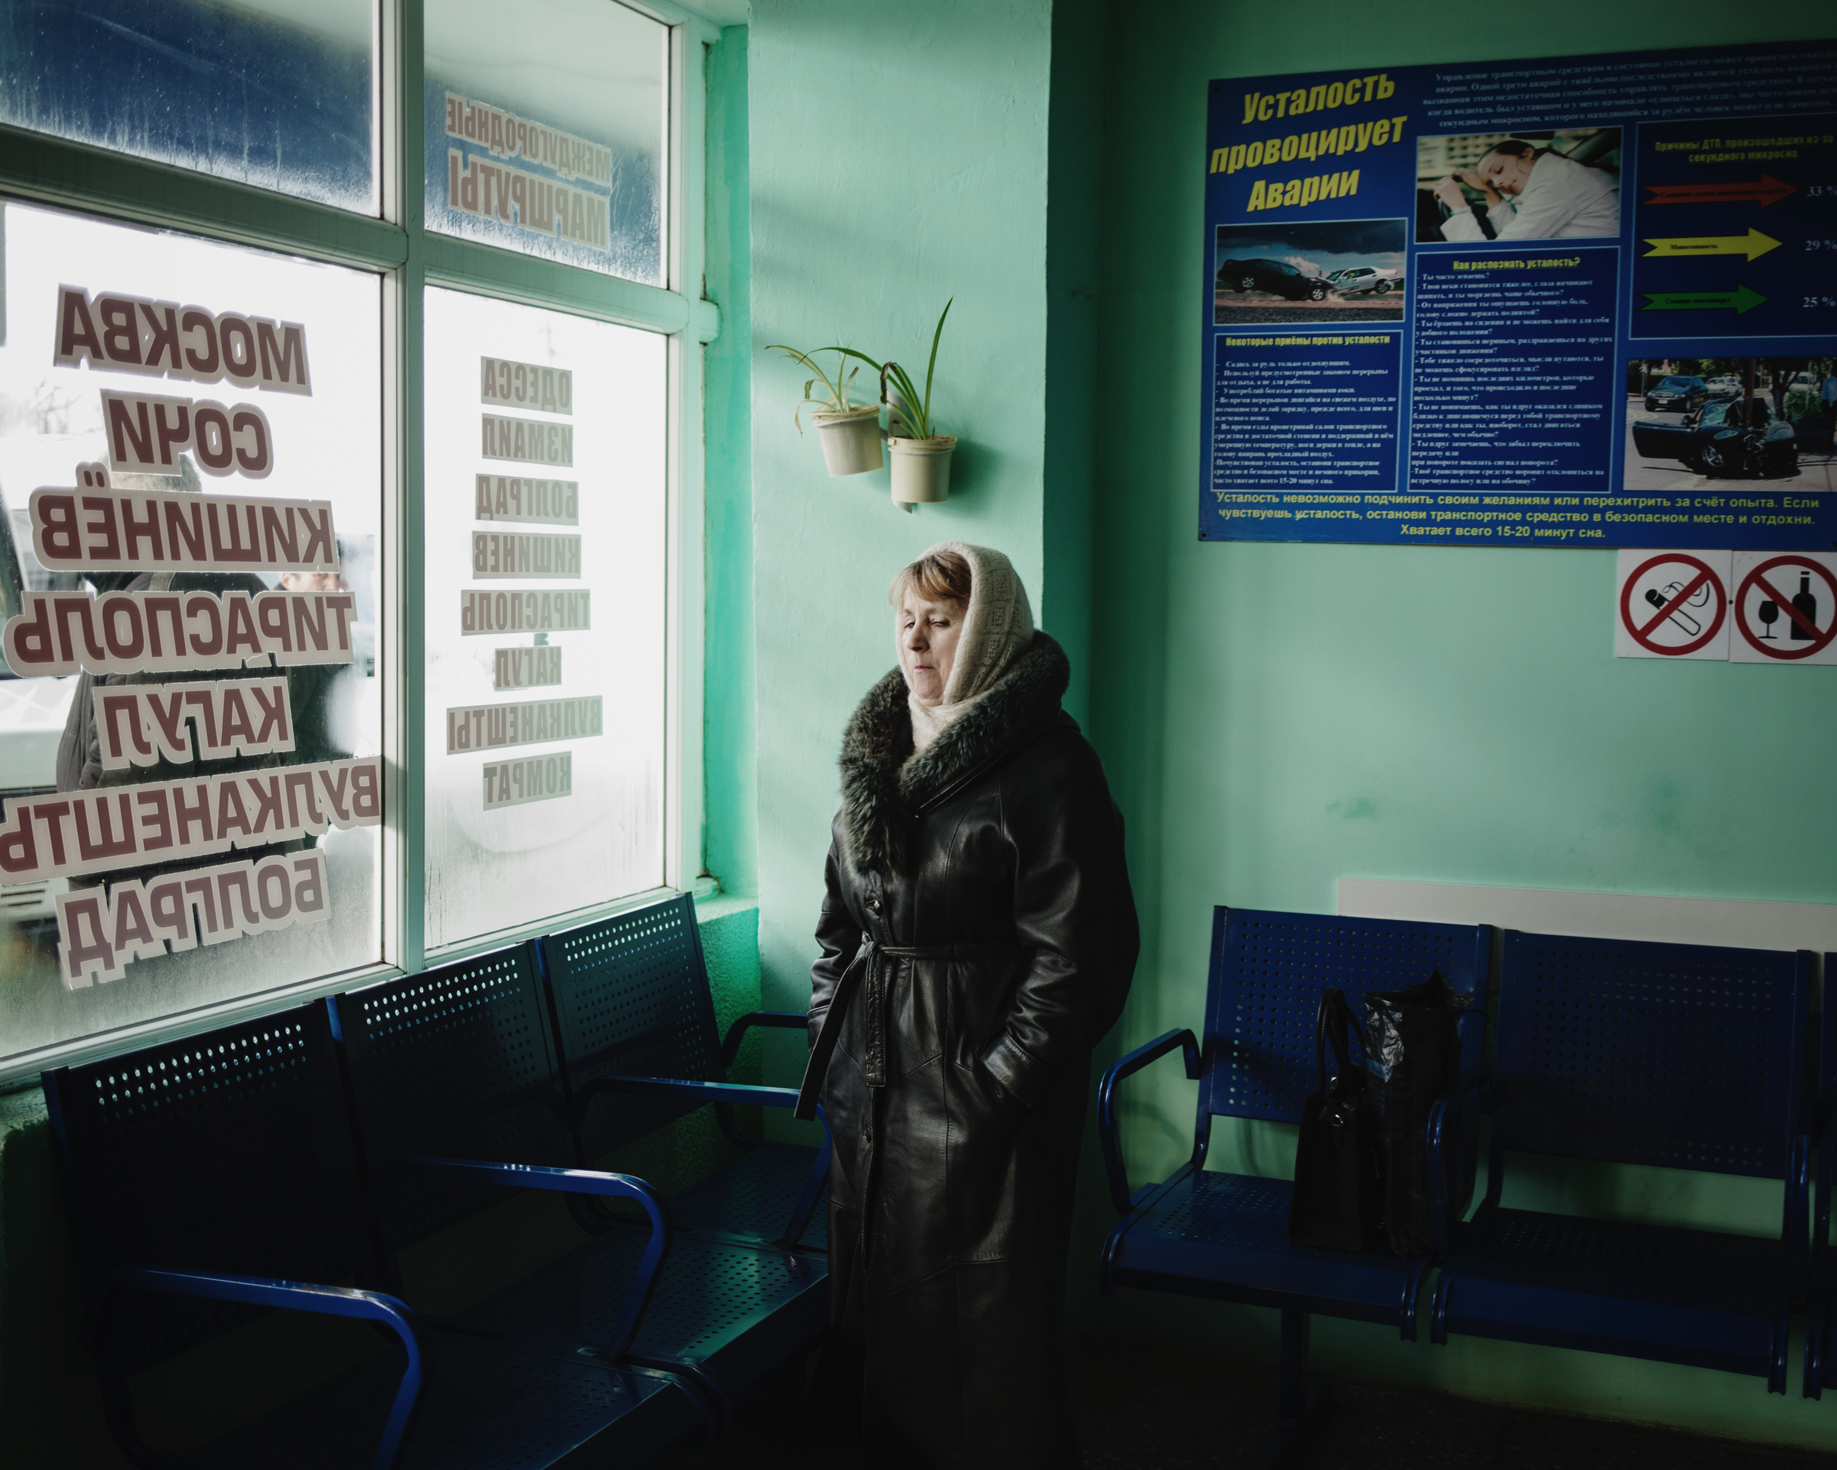  Ceadir-Lunga - In the main bus station where buses leave to Moldova, Russia, Transnistria, etc 